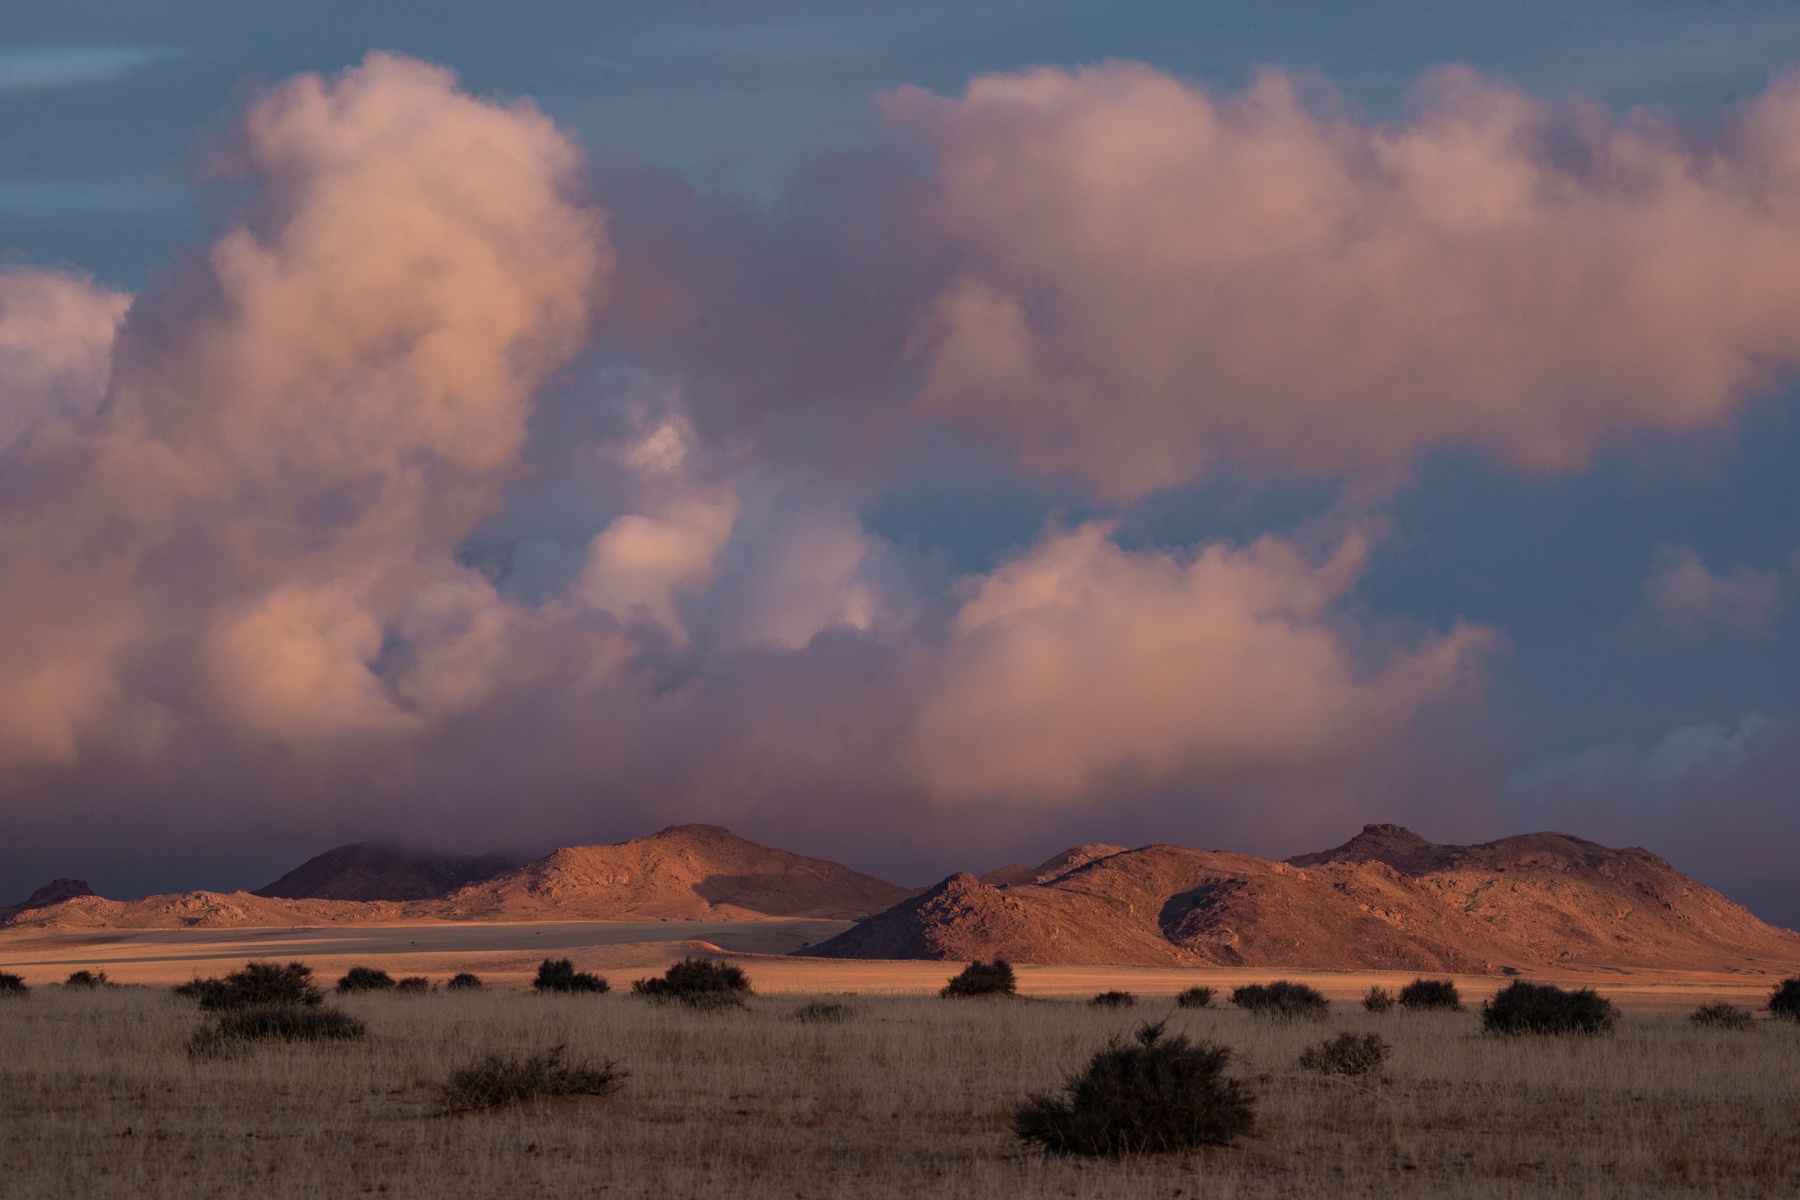 Pink clouds at dusk in the beautiful Tsau Khaeb National Park of southern Namibia